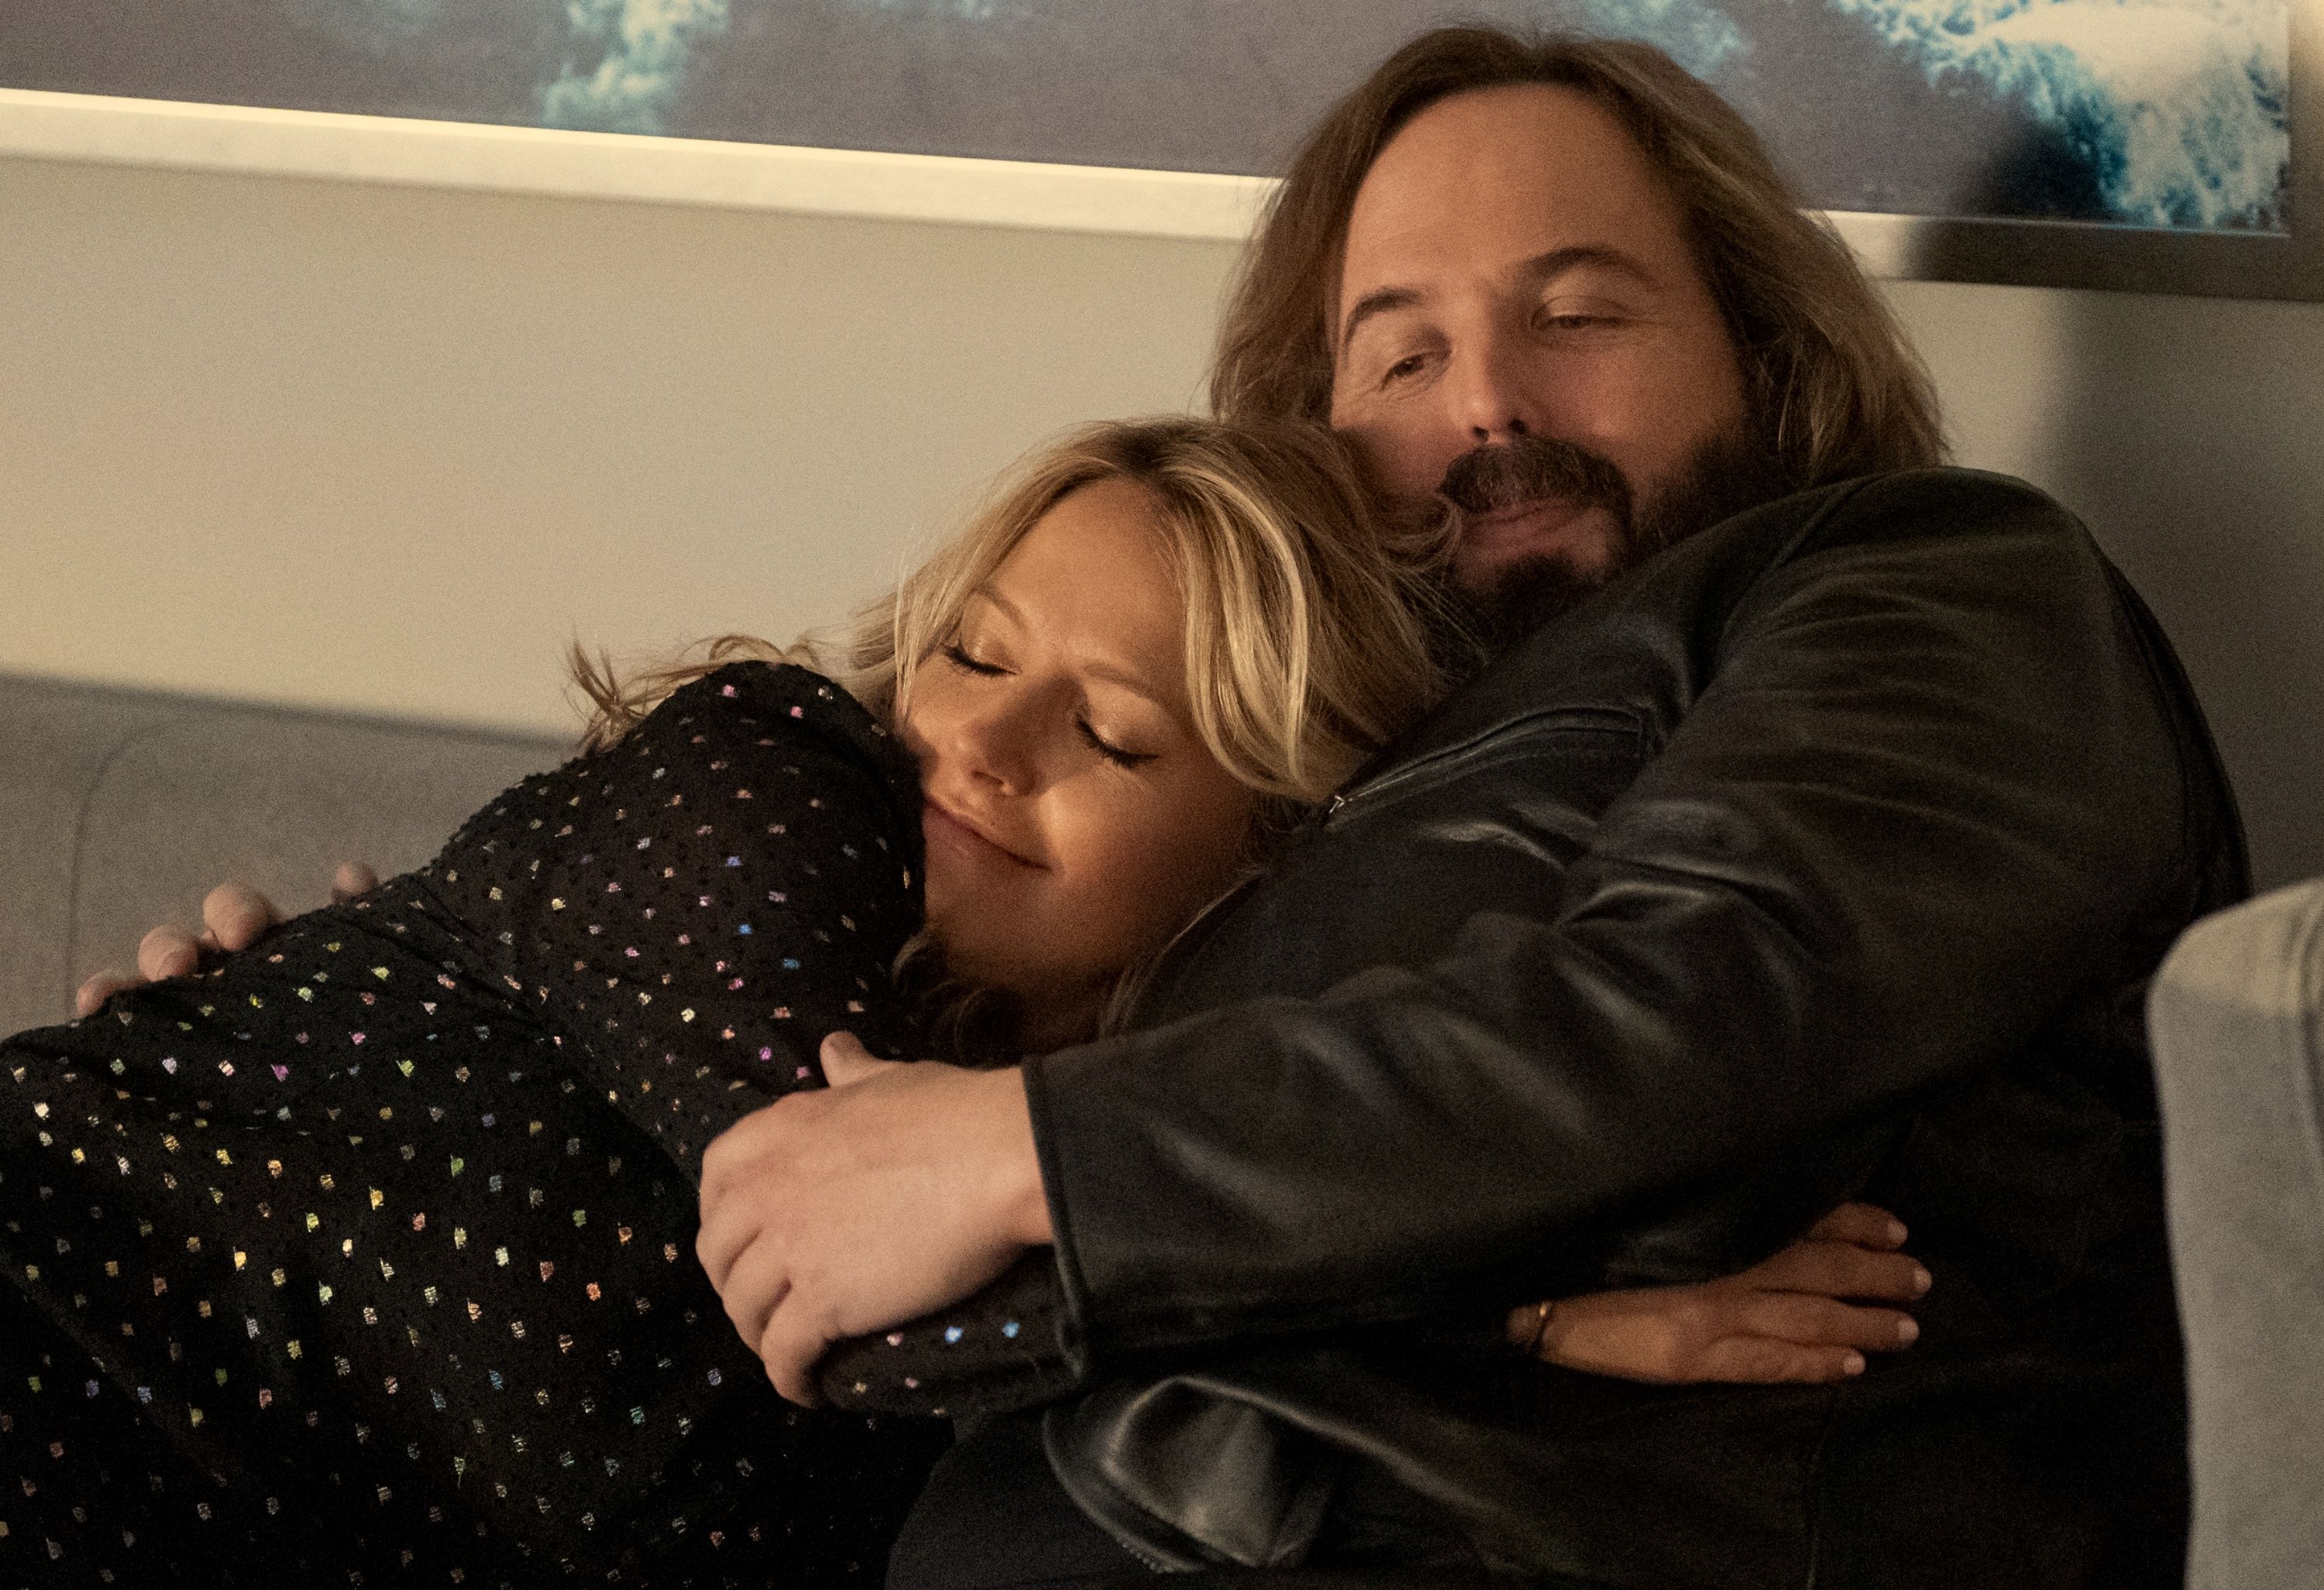 Becki Newton as Lorna and Angus Sampson as Cisco in Season 2 Part 2 of The Lincoln Lawyer